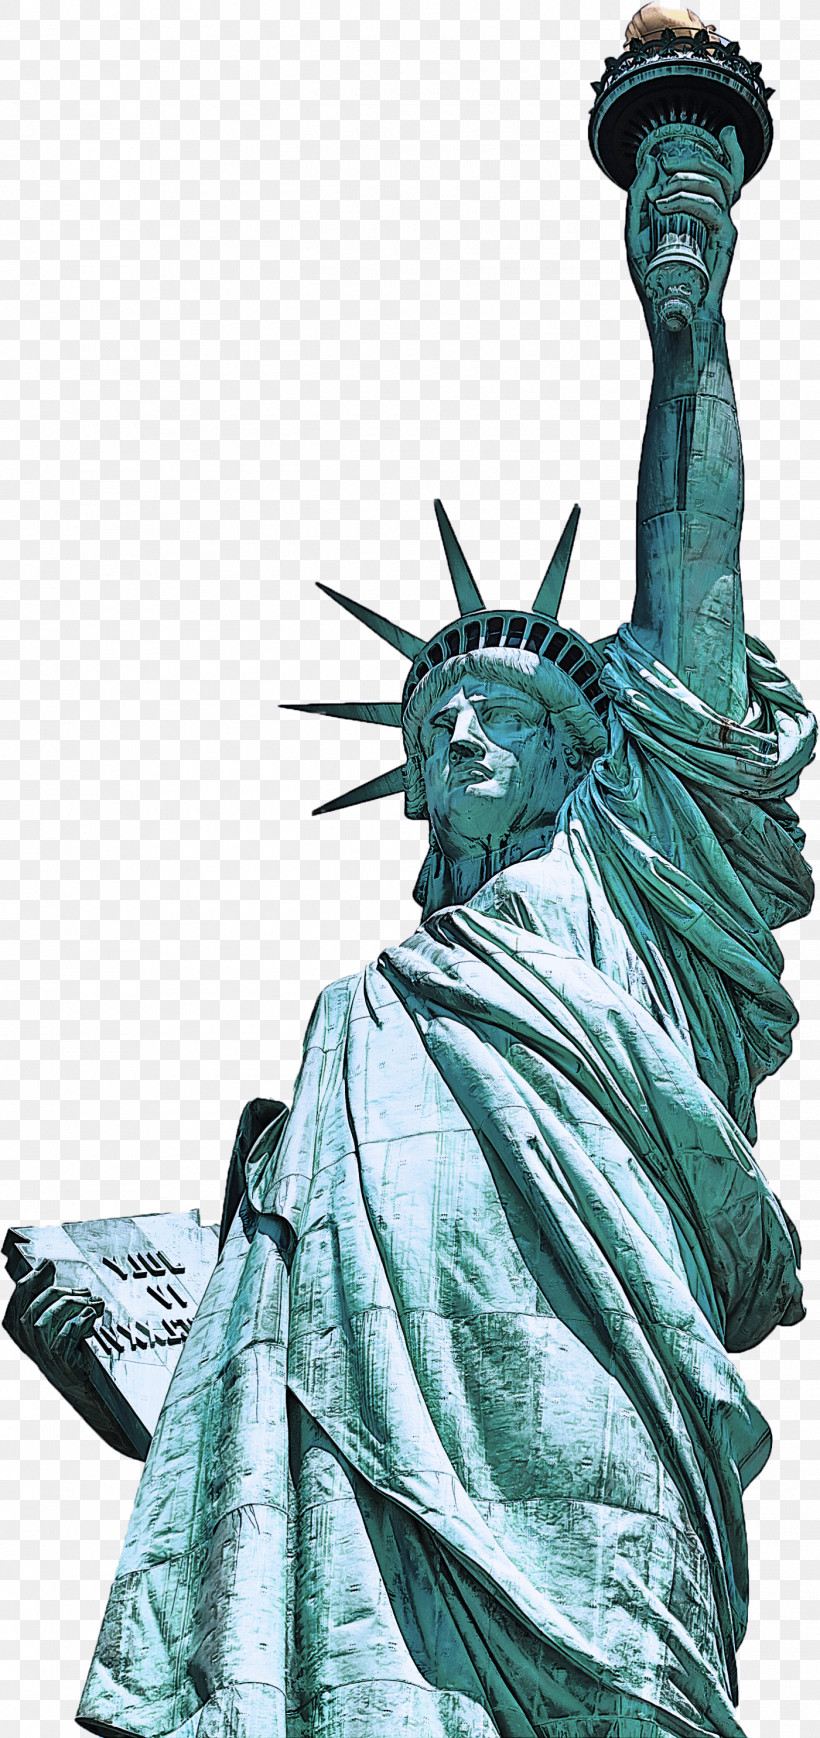 Statue Sculpture Classical Sculpture Stone Carving Statue Of Liberty National Monument, PNG, 1400x2969px, Statue, Carving, Character, Classical Sculpture, Line Art Download Free